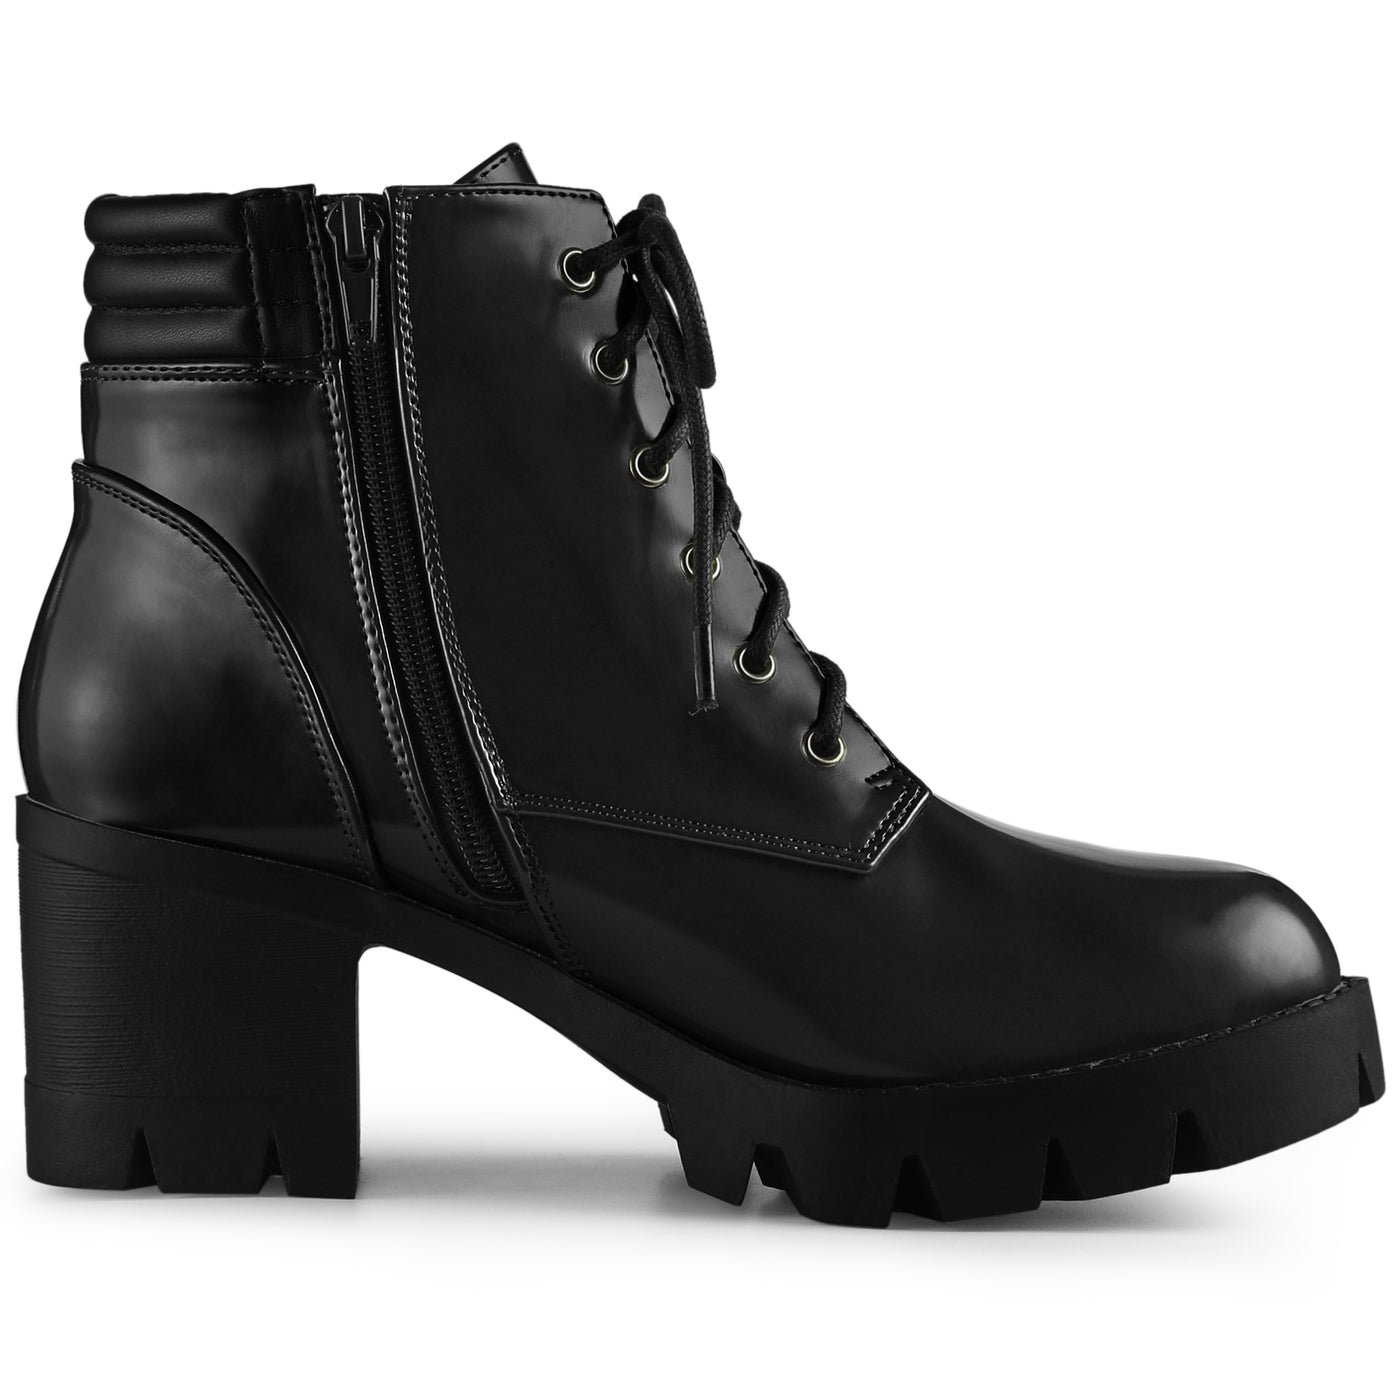 Bublédon Perphy Women's Lace Up Platform Chunky Heel Combat Boots